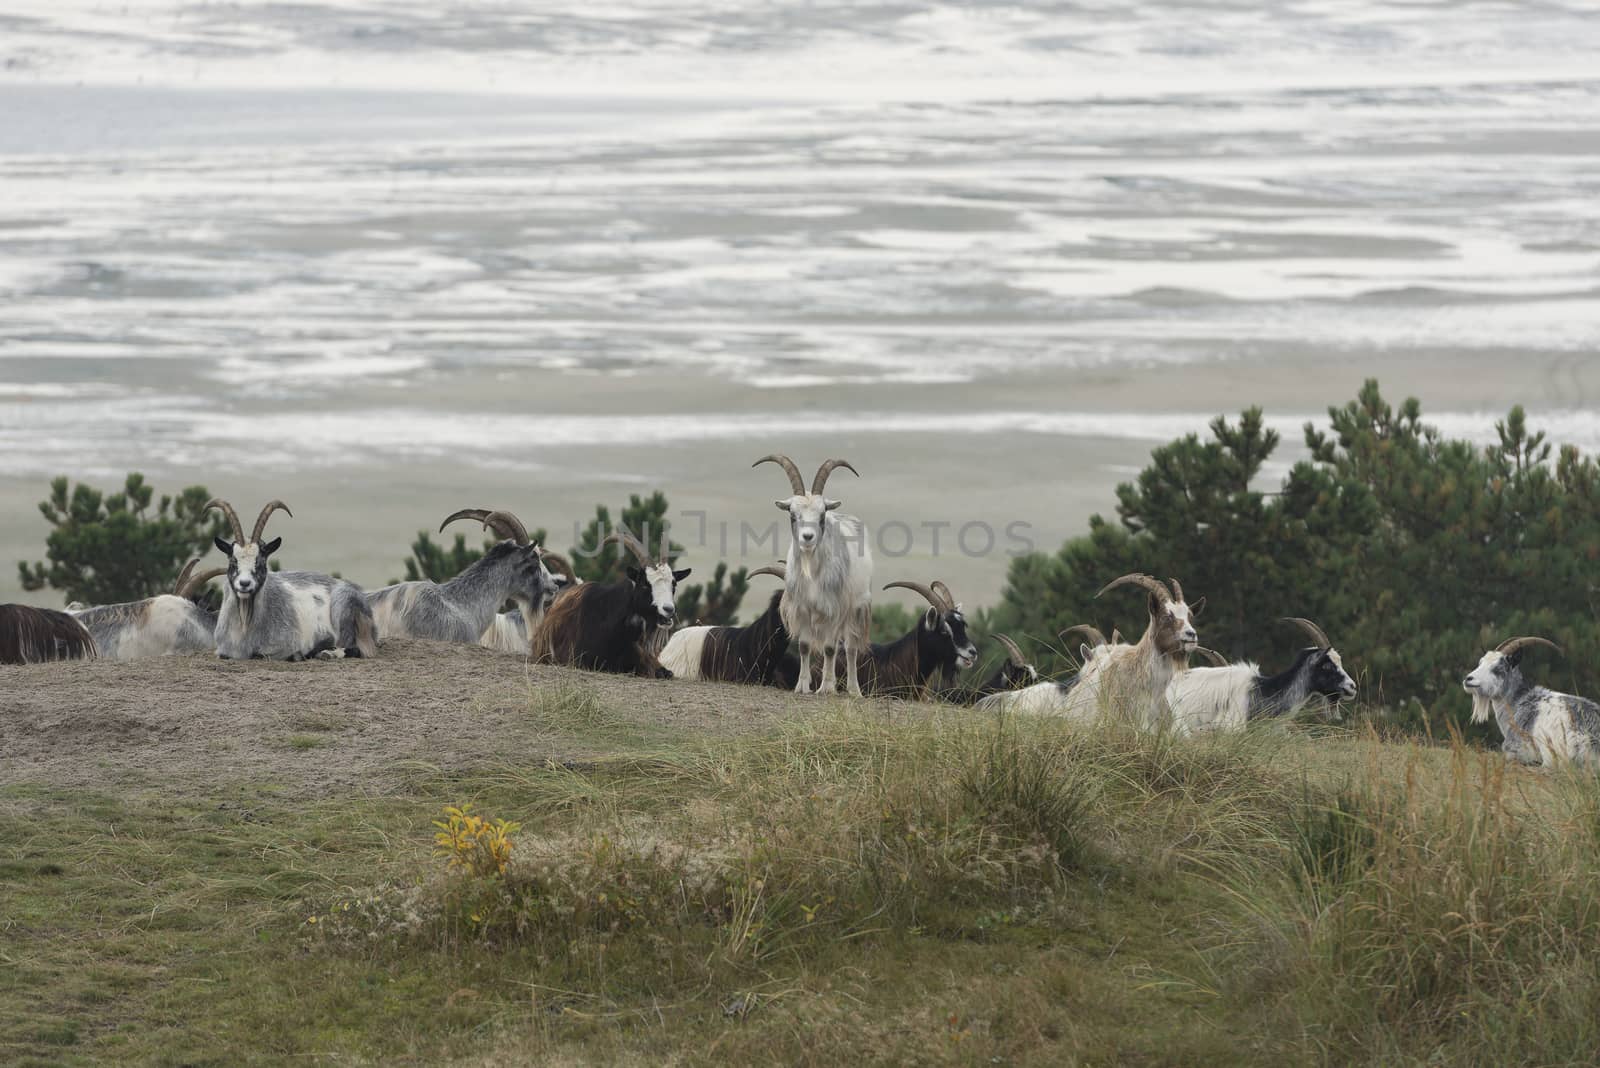 Goats in the dunes of the island Terschelling
 by Tofotografie